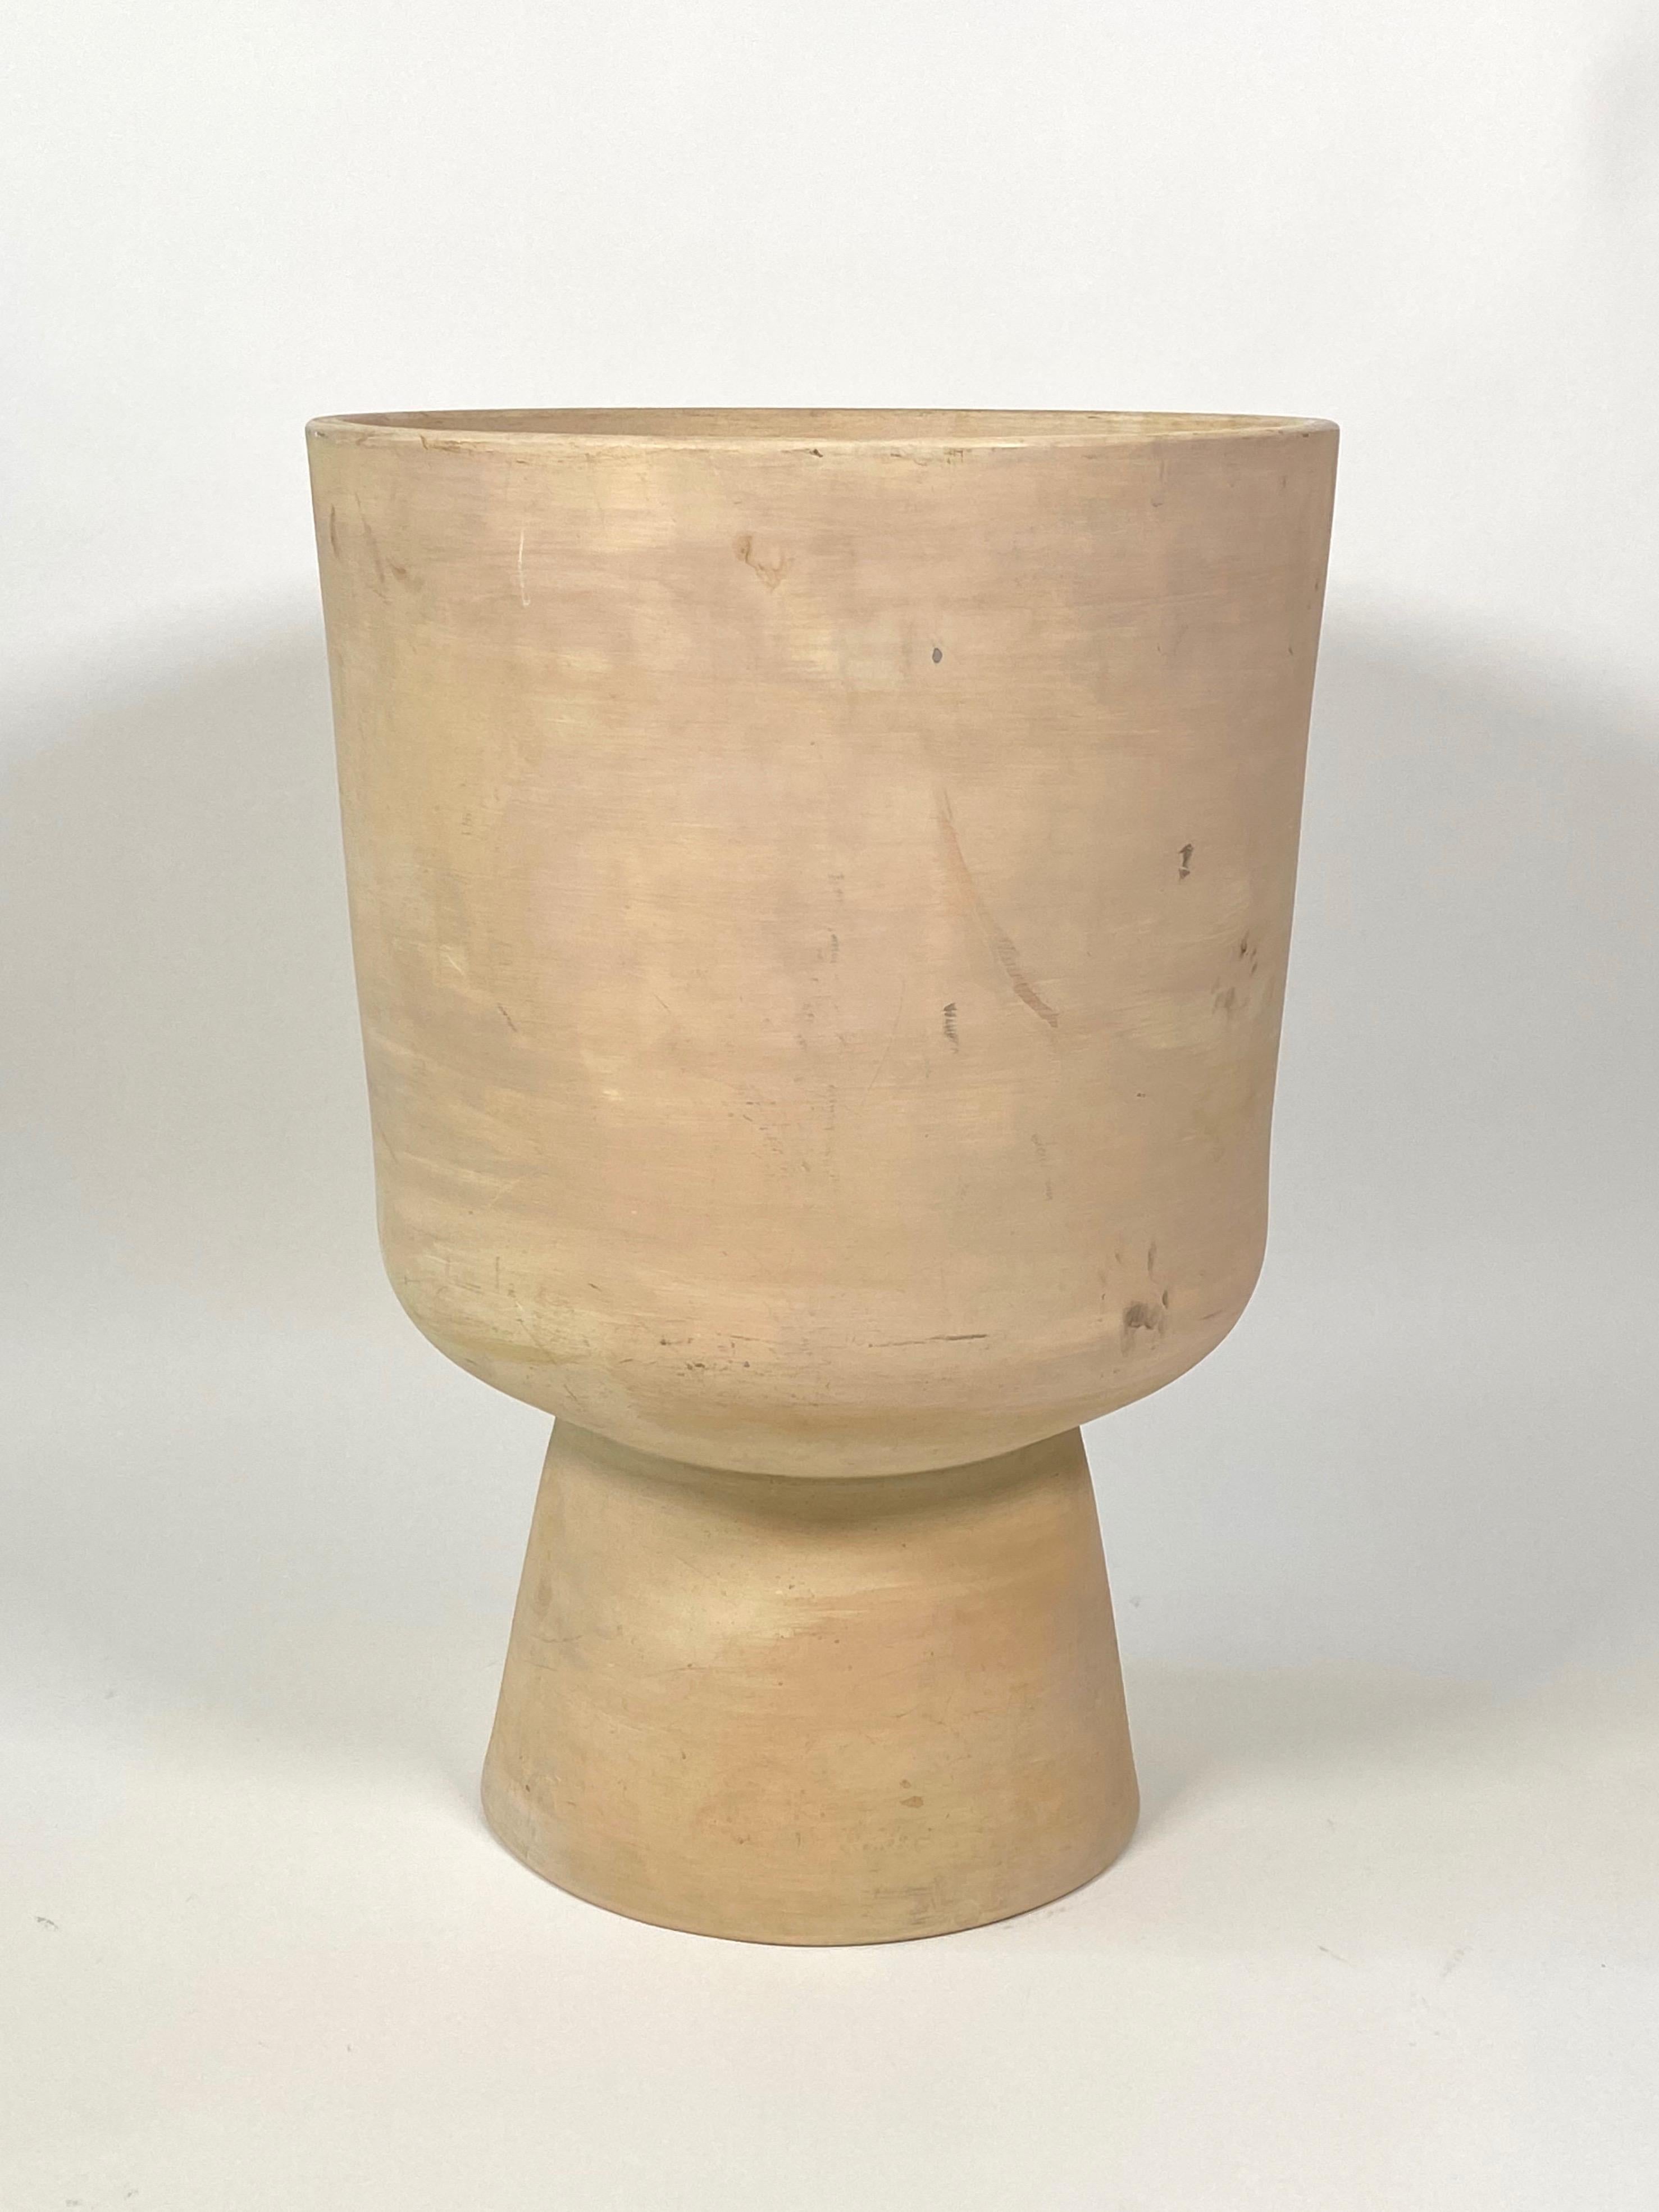 Unglazed planter designed by Malcolm Leland for the Southern California company Architectural Pottery circa 1950s.The bisque finish was designed to let the water evaporate when the planter was used indoors. The largest of this design sometimes